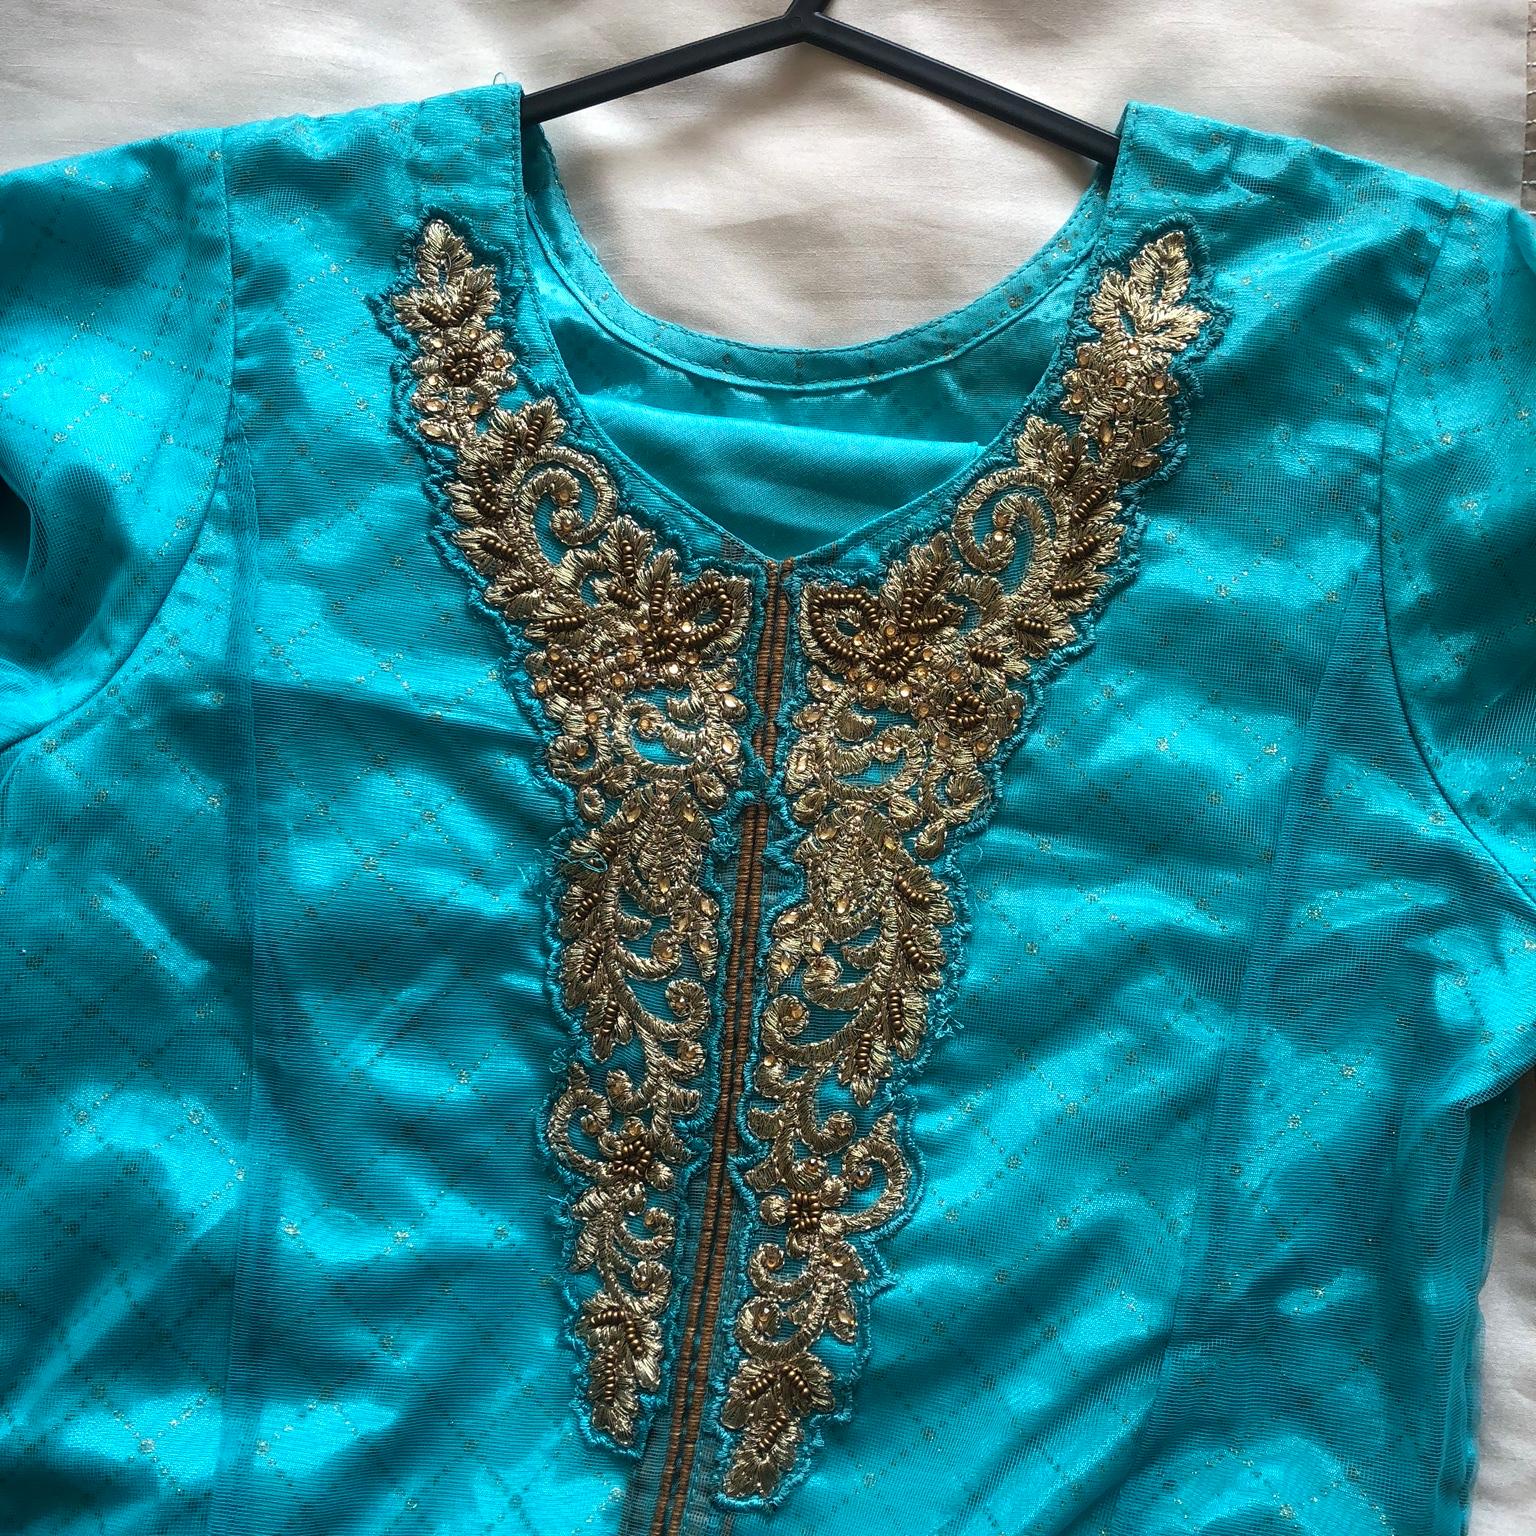 Light Blue Dress Asian With Embroidery In Wf12 Kirklees For 30 00 For Sale Shpock